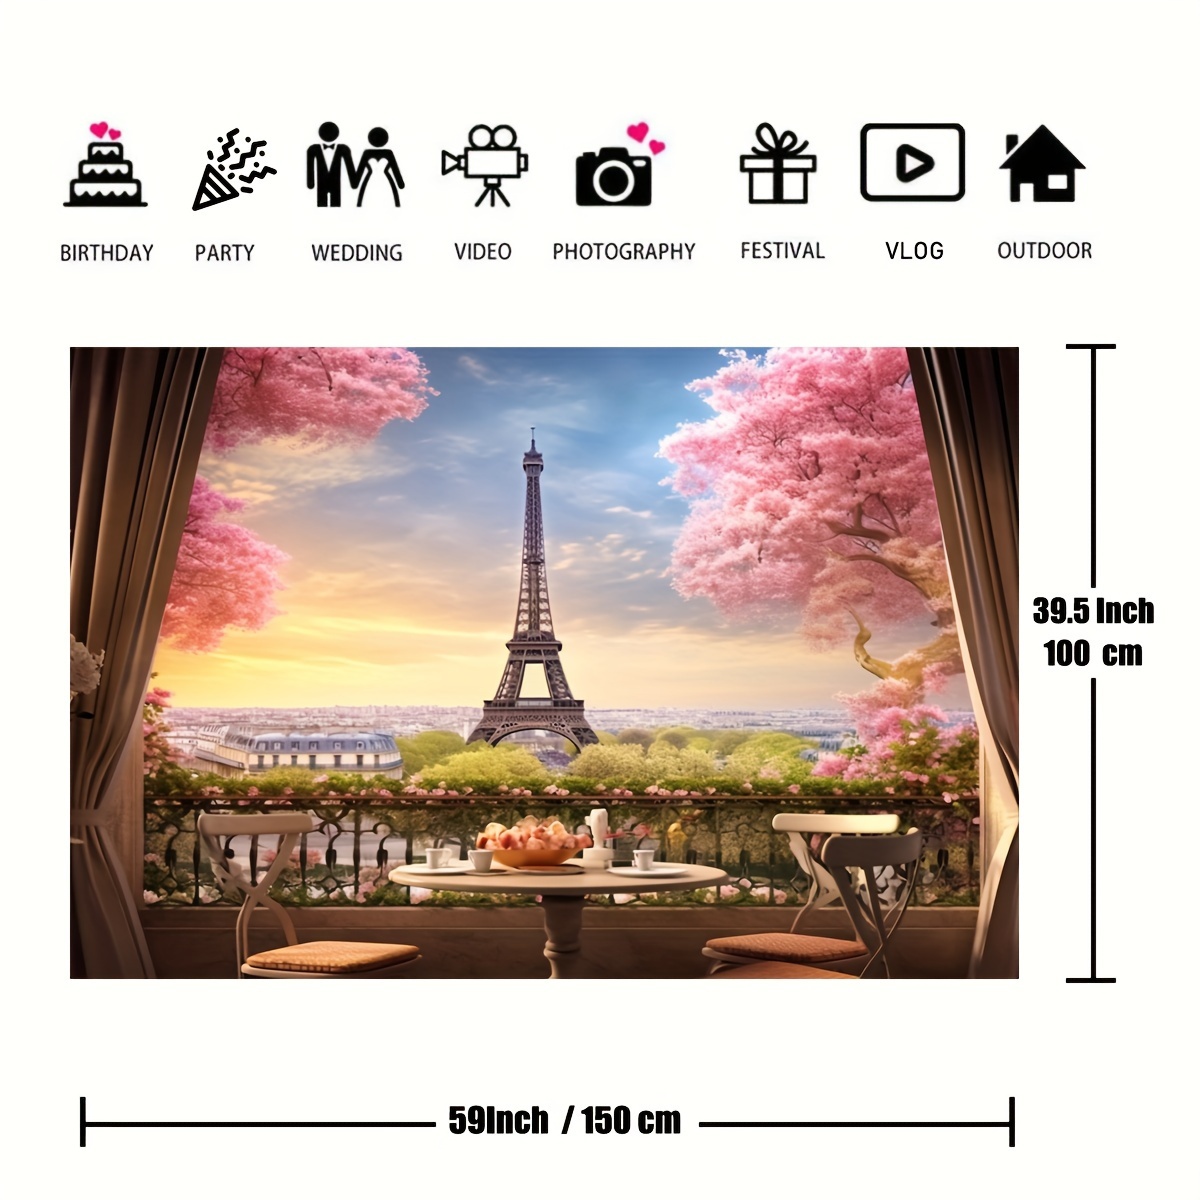 1pc french paris eiffel tower garden backdrop photoshoot flowers tree curtain sunset landscape city view photography background adults wedding portraits vacation banner props party decor supplies home decor supplies indoor outdoor decor